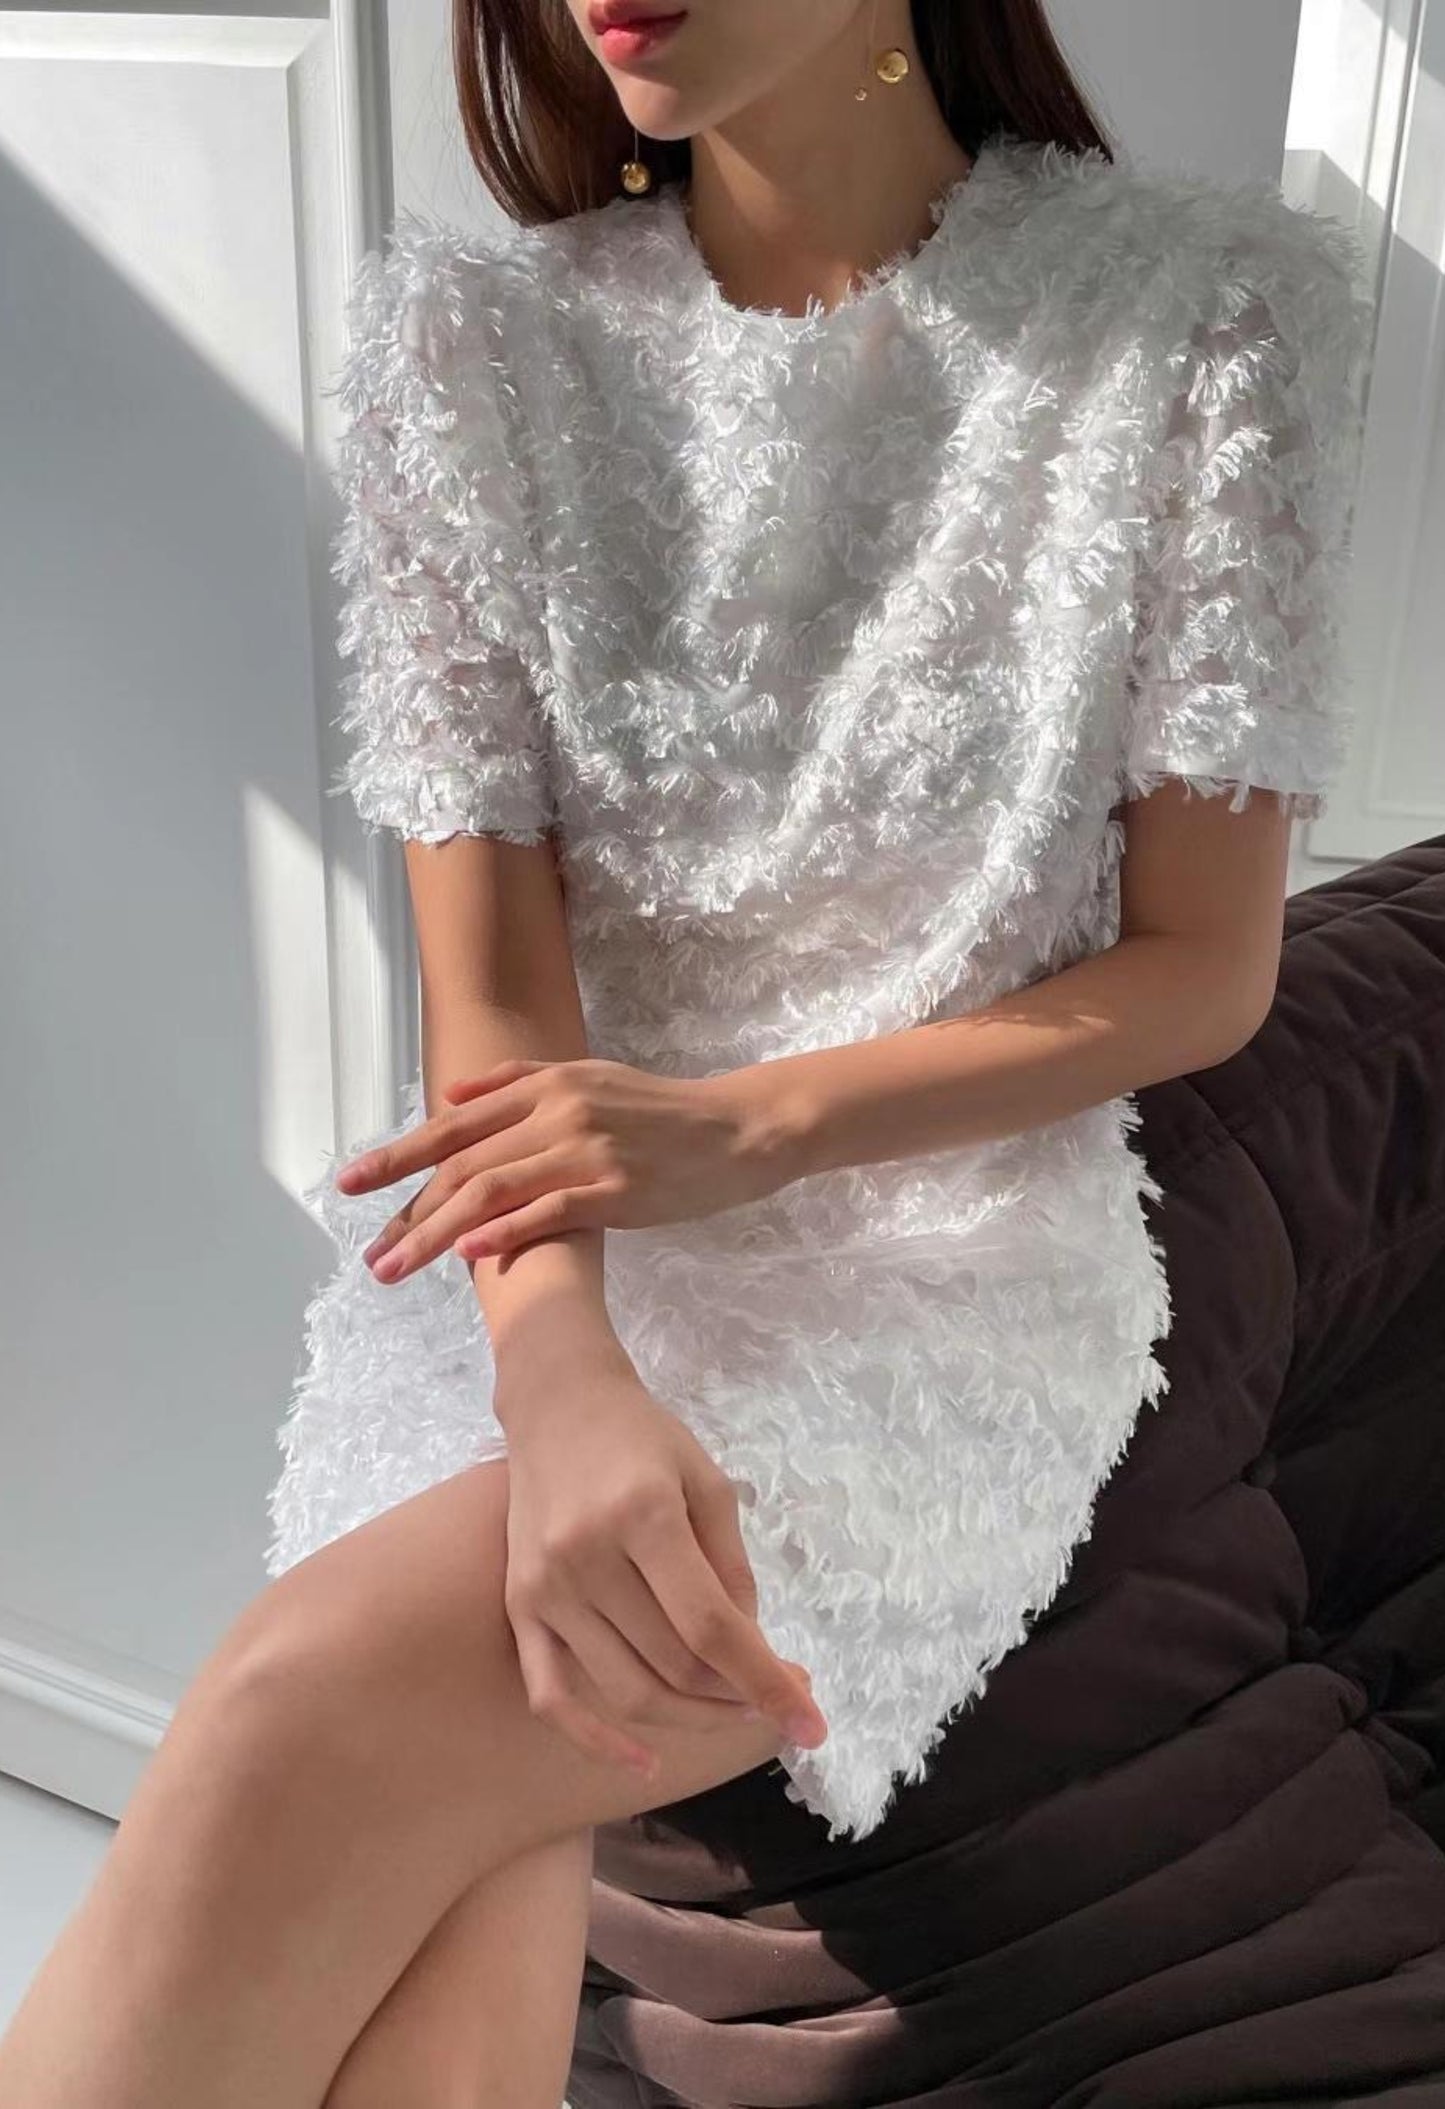 Feathered Frill Dress in White